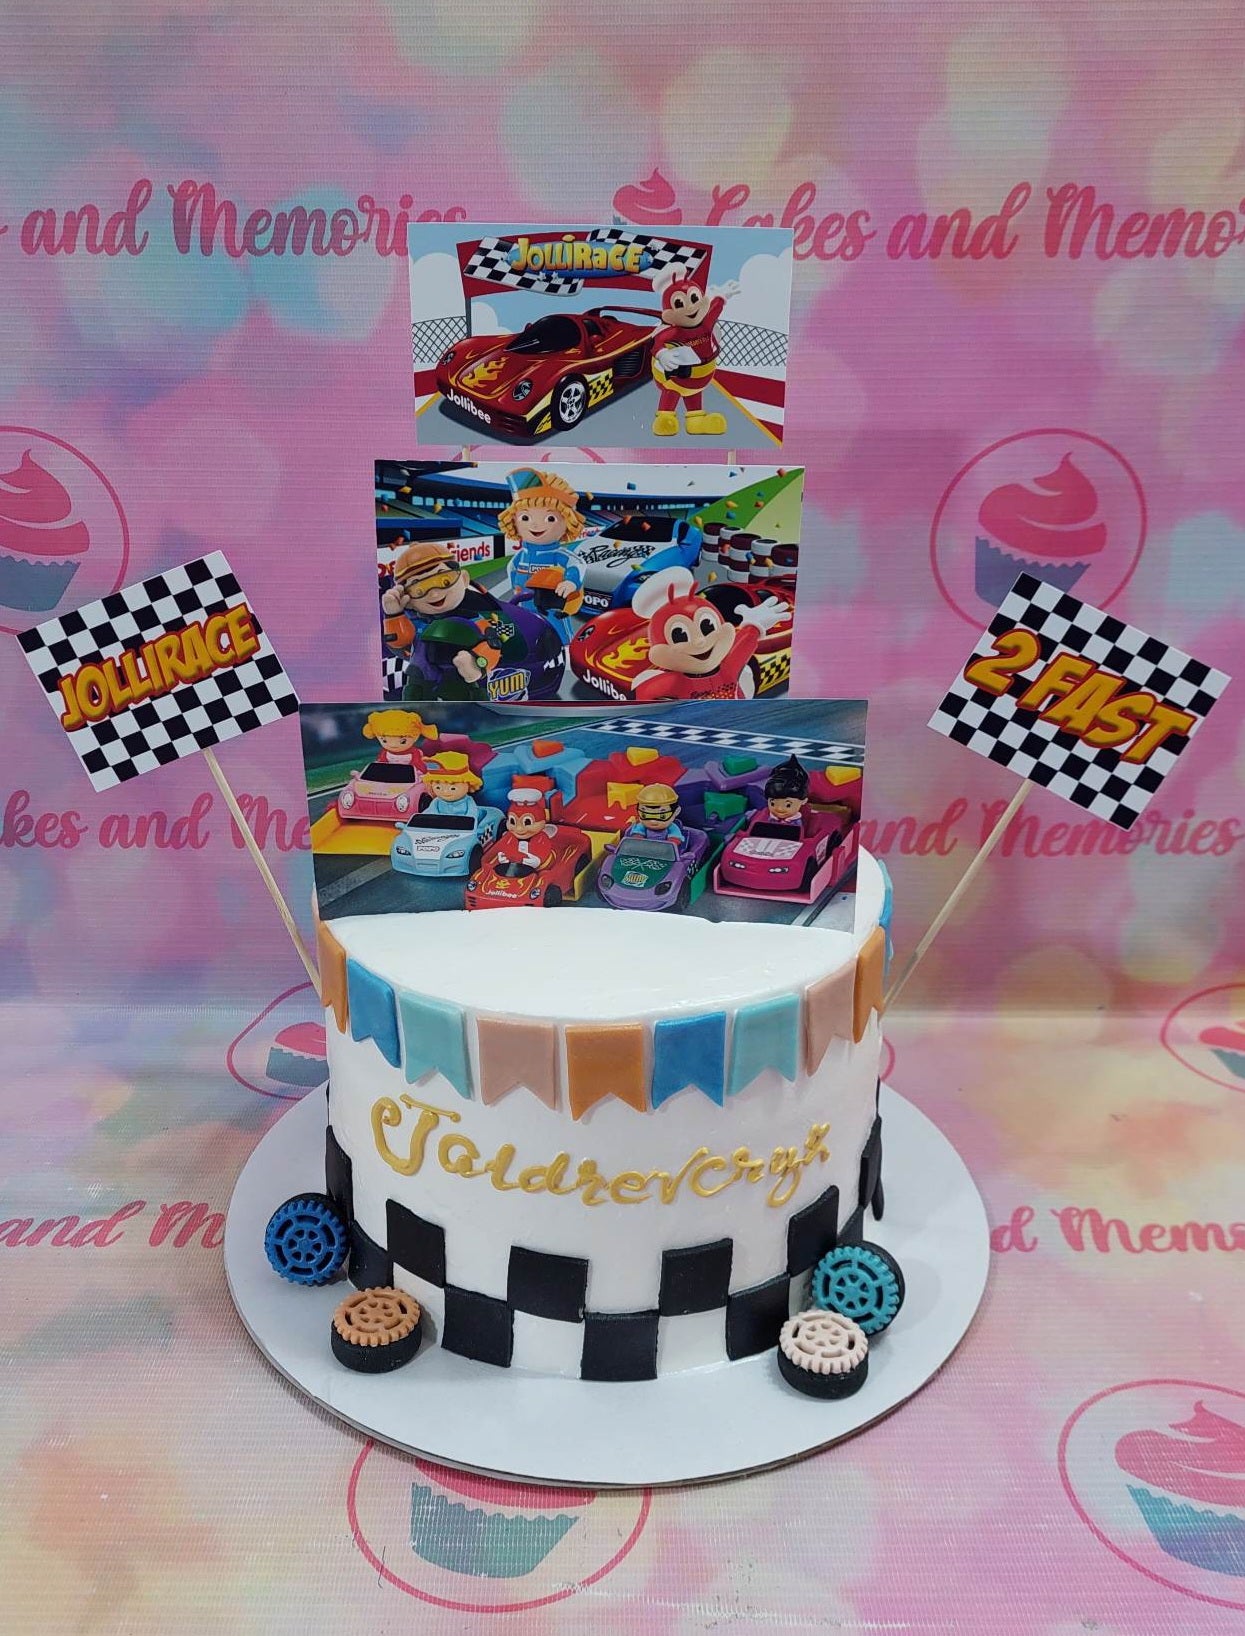 .

This custom decorated cake features an exciting racing checkered flag design and features Jolibee with his friends Hetty and other Fastfood Pinoy characters. The cake is white with vibrant colors, perfect for a birthday celebration. All decorations are of excellent quality.